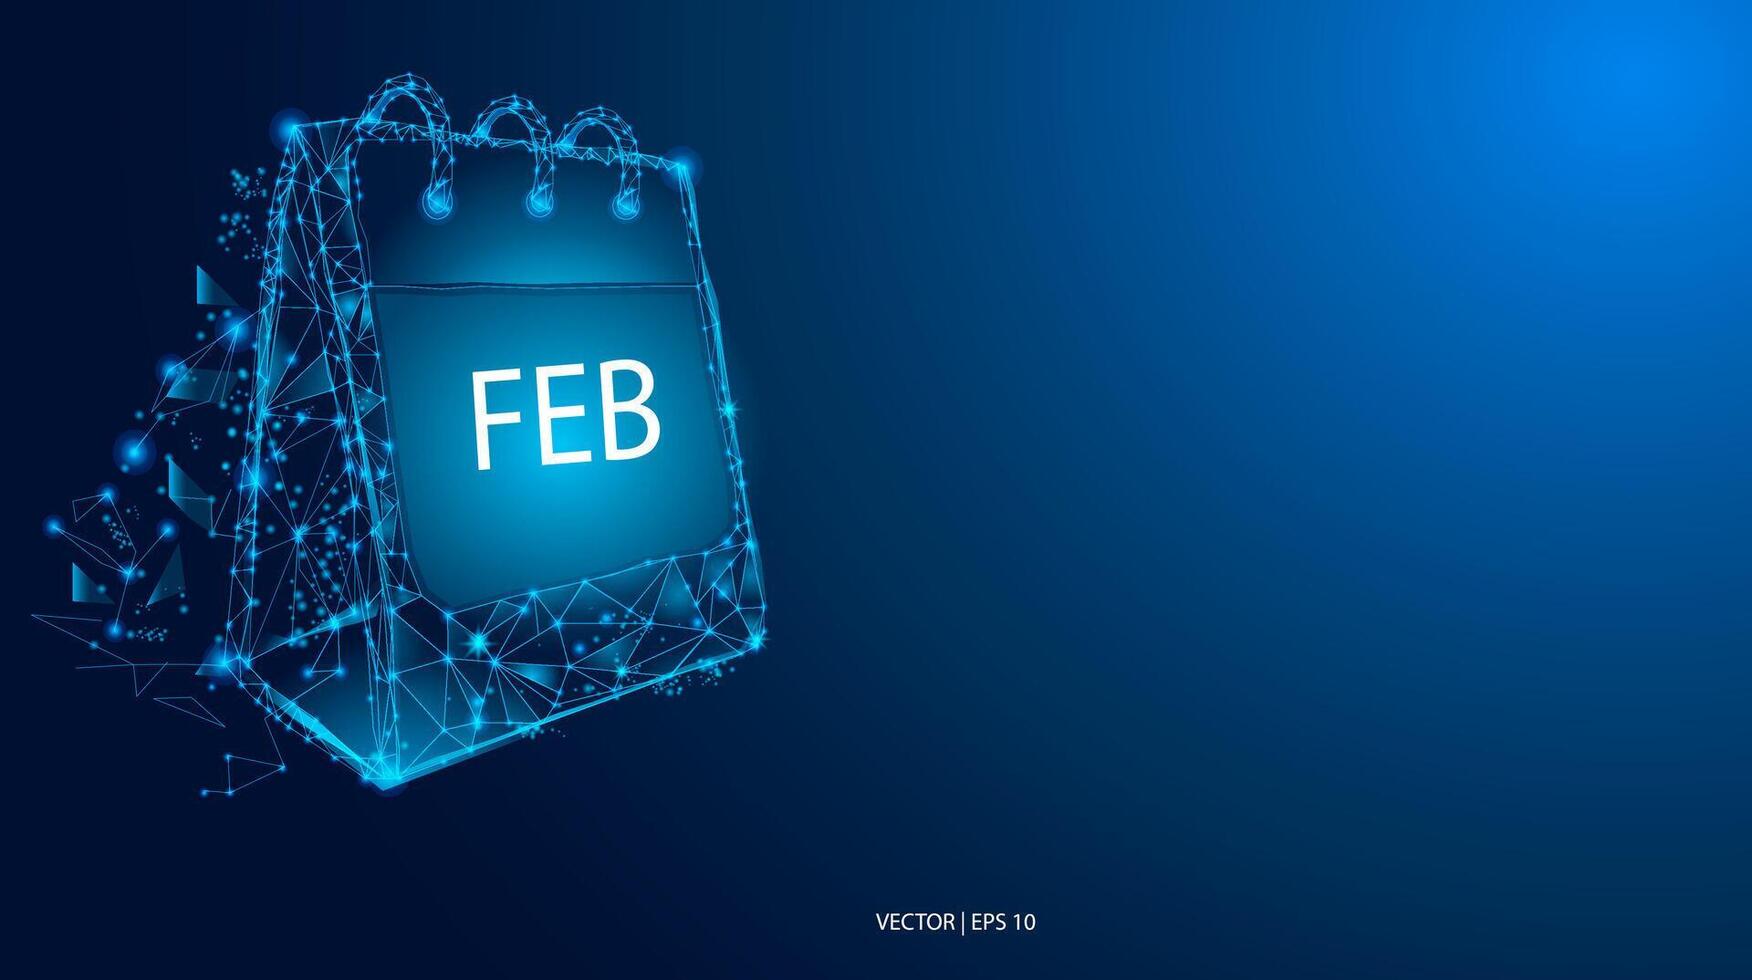 Abstract connection line and dot on blue-light background. Calendar, month, year, Feb, schedule, planner, deadline, on-time concepts. illustration vector